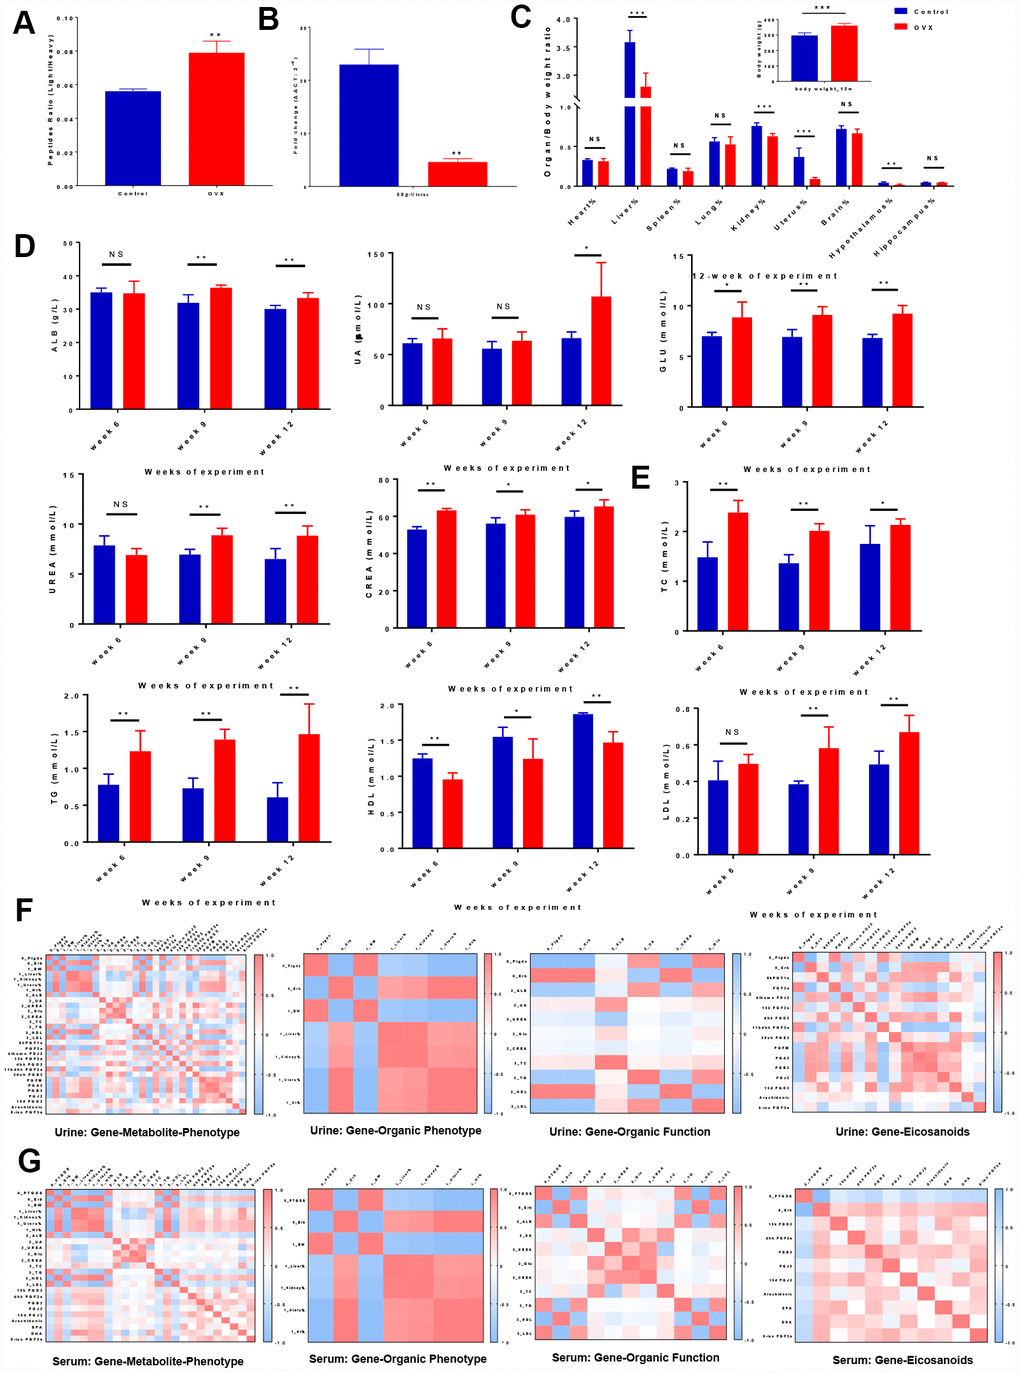 Correlation analyses illustrated the relationships among ‘genes-metabolites-phenotypes’ in ER-depletion-induced renal lipid metabolism disorder. (A) Relative peptide quantification in control and OVX rat urine samples. n=3, mean ± s.e.m.; (B) Real time PCR assays of uterus ERβ among control, OVX and OVX+E2 rats. n=3, mean ± s.e.m.; (C) Average weekly body weight (g) from 0 to 12 weeks before and after surgery and average organ/body weight ratio (organ %) at 12 weeks after surgery. (D) Kidney biochemical profiles in the sera of control and OVX rats. (E) Lipid biochemical profiles in the sera of control and OVX rats. n=6, mean ± s.d., compared to control rats, *p ˂ 0.05, **p ˂ 0.005, ***p ˂ 0.0005. Correlation heat map representation of the differentially expressed gene and metabolite markers in organs, renal biochemistry, and lipid biochemistry phenotypes including genes clustered into organ phenotypes, subsets of genes clustered into organ functions and subsets of genes clustered into eicosanoid markers in urine (F) and serum (G).